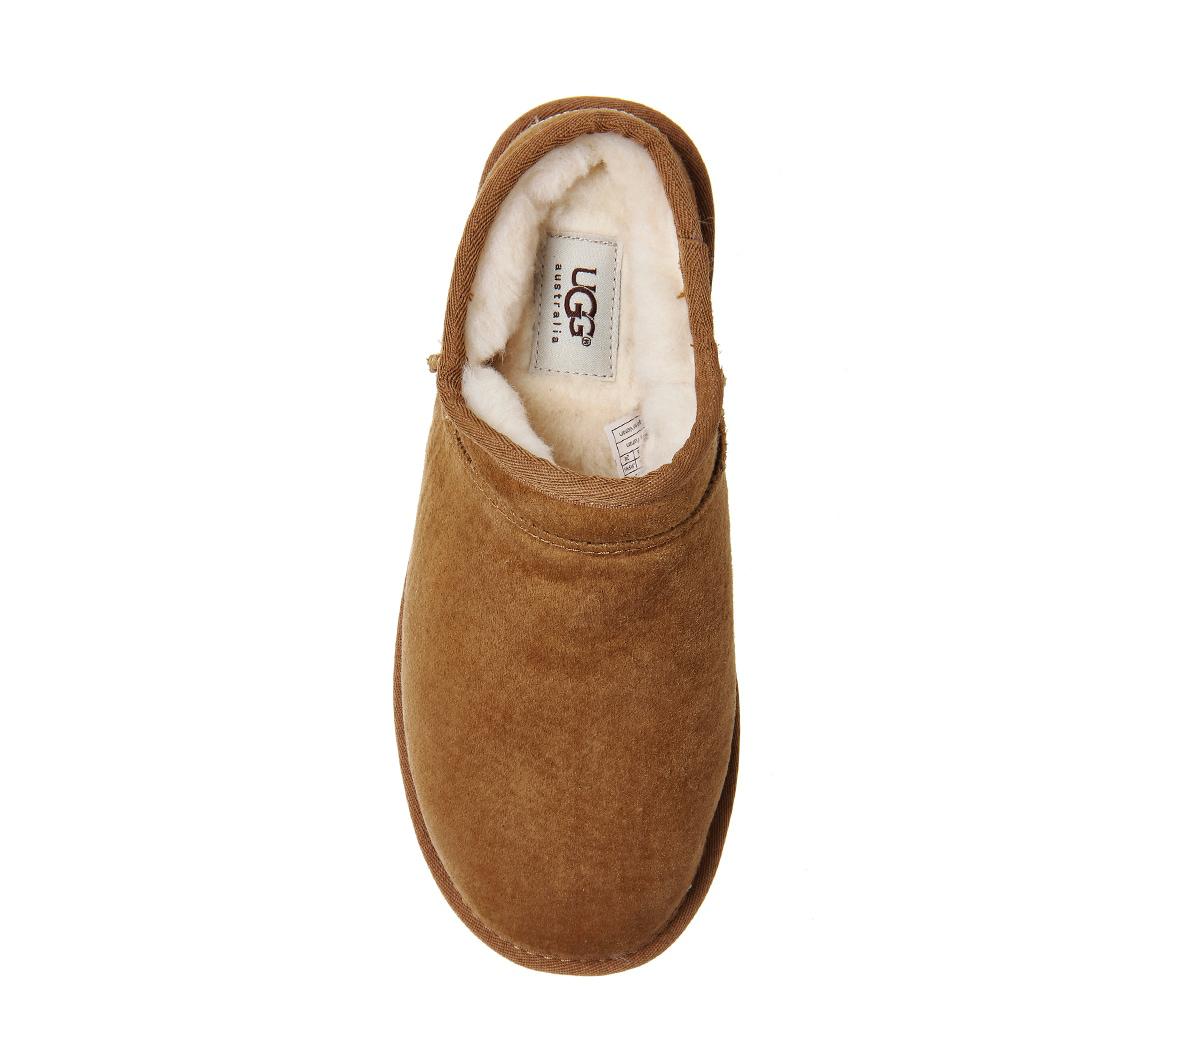 UGG Classic Slippers in Chestnut (Brown) - Lyst